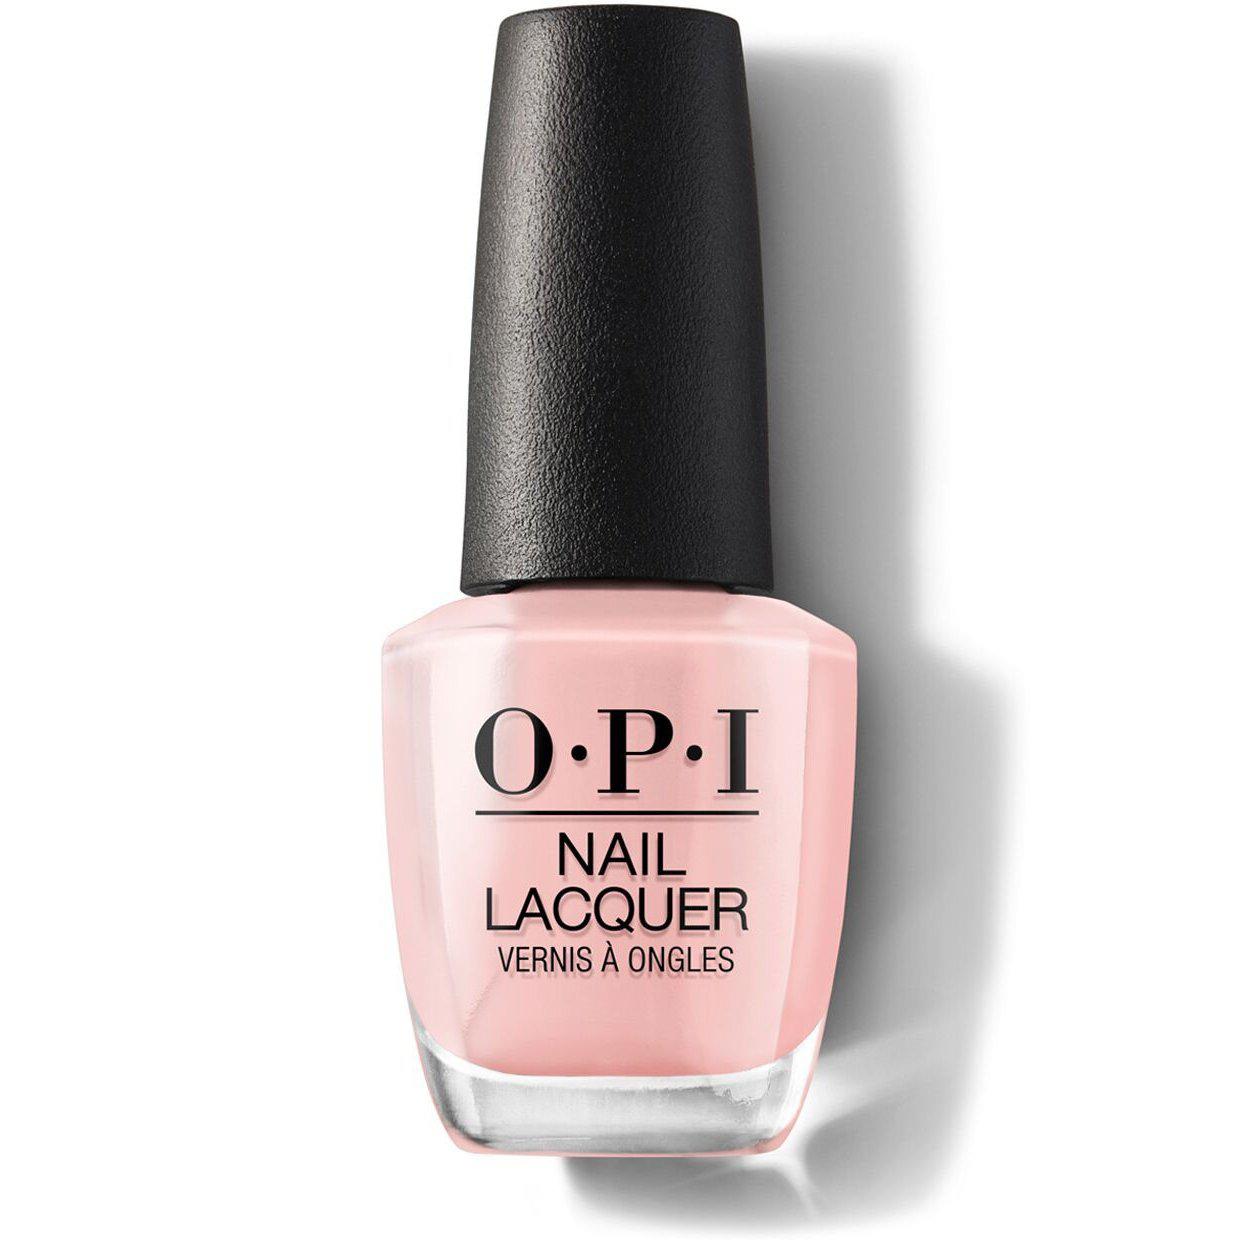 OPI nail lacquer Passion